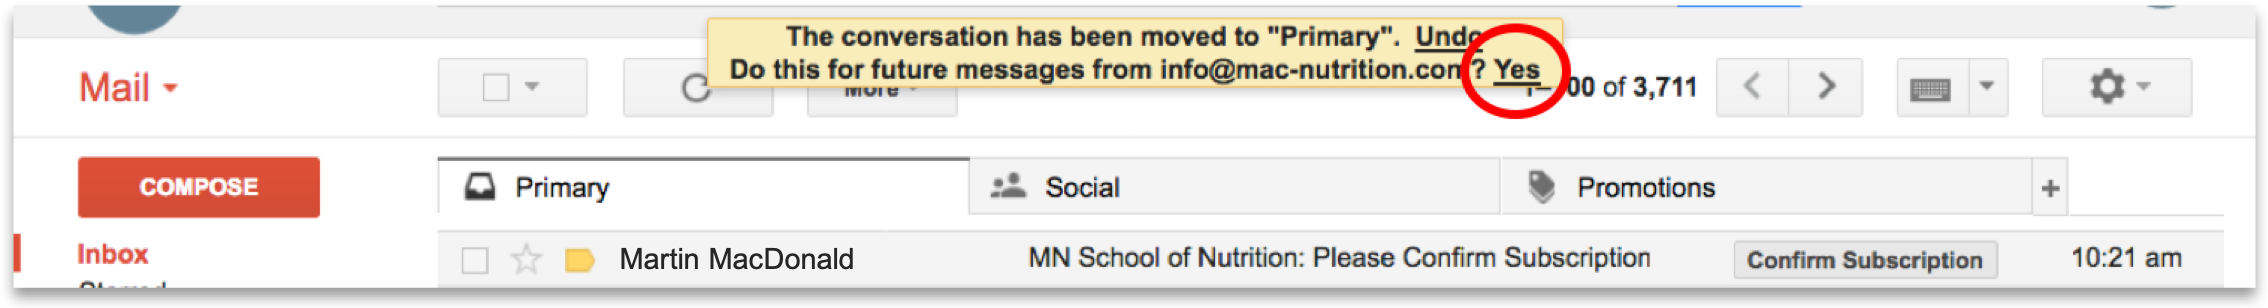 Gmail 3 - MN School of Nutrition